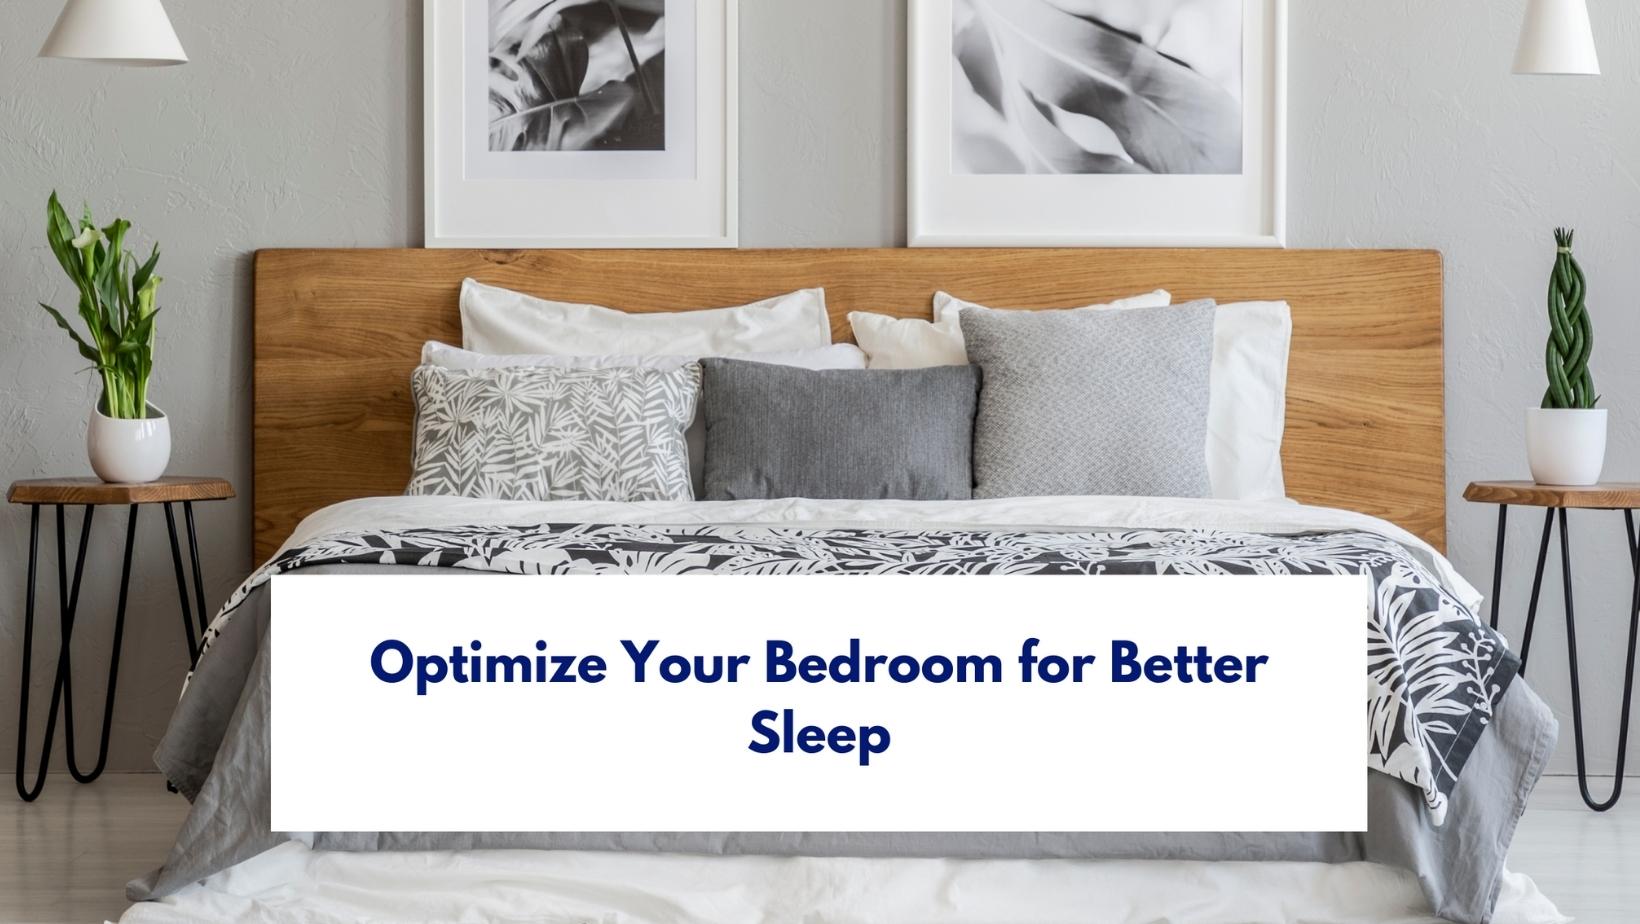 Optimize Your Bedroom for Sleep, the bed in background